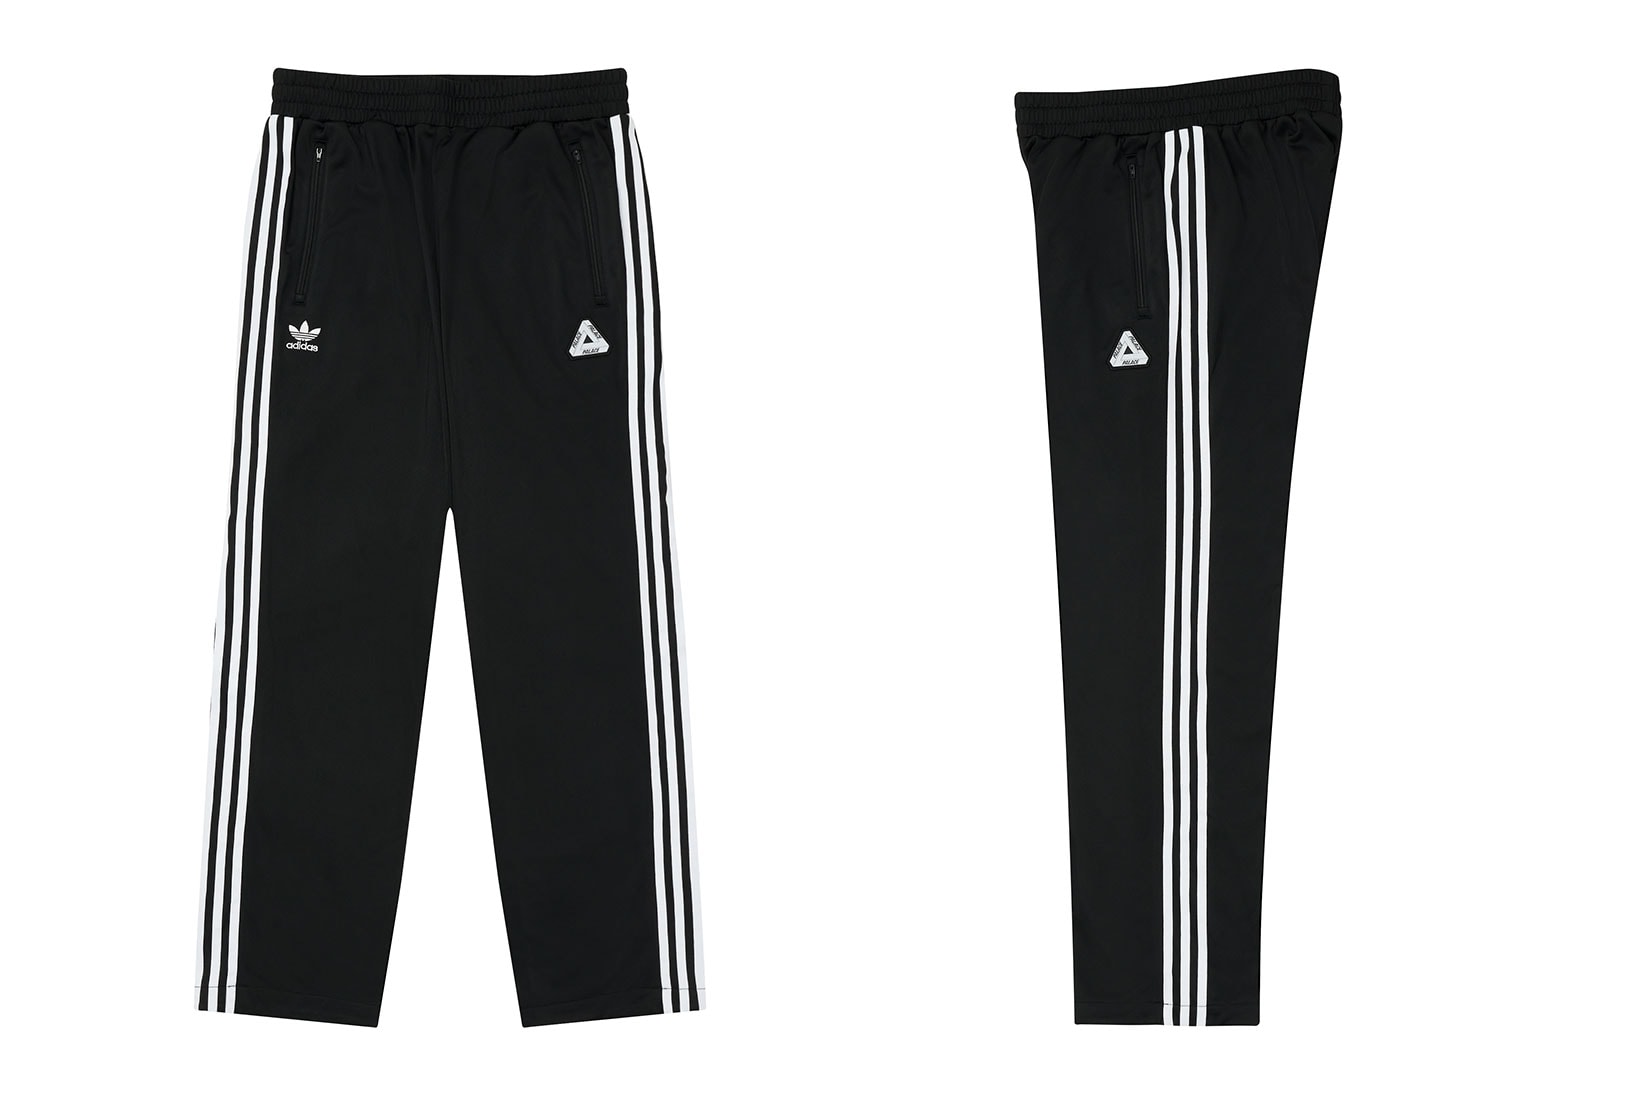 palace skateboards holiday drop 5 adidas originals tracksuits black pants release when to buy